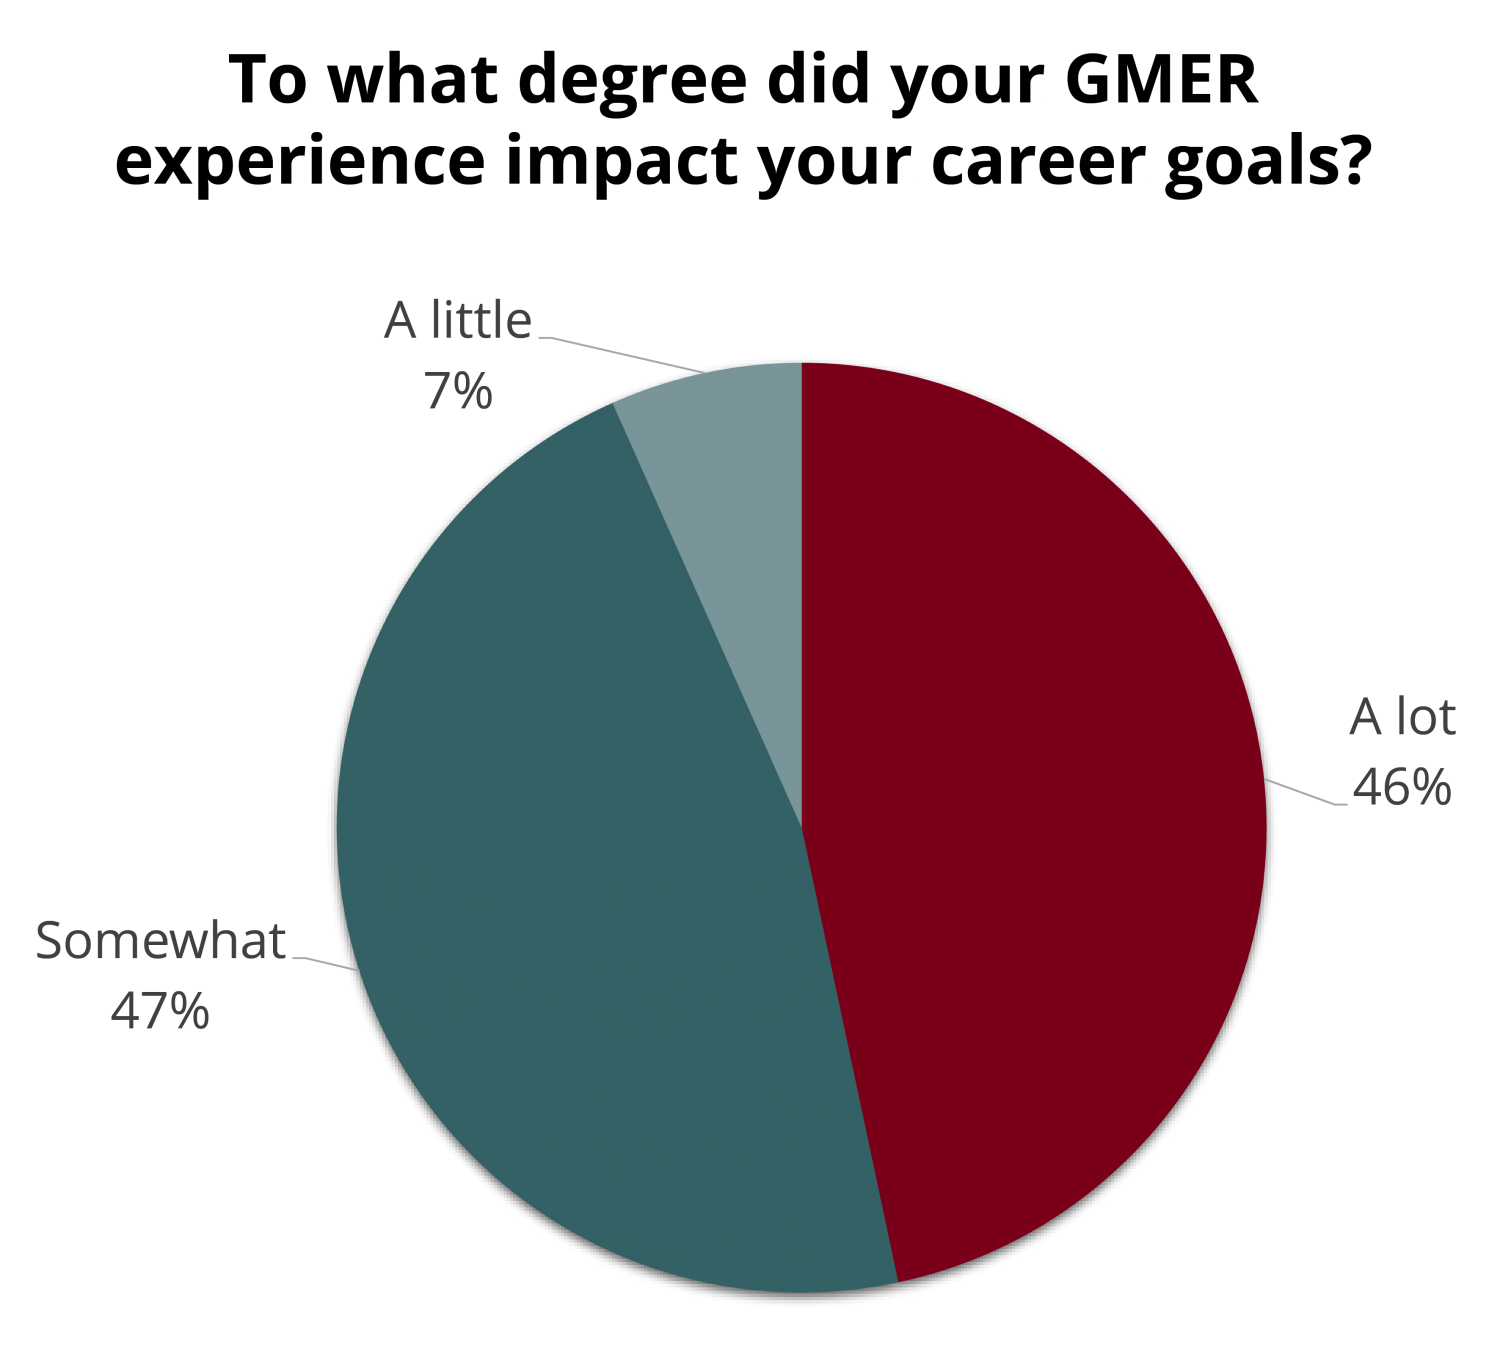 Pie chart with title "To what degree did your experience impact your career goals?". 46% report a lot, 47% report somewhat, and 7% report a little.